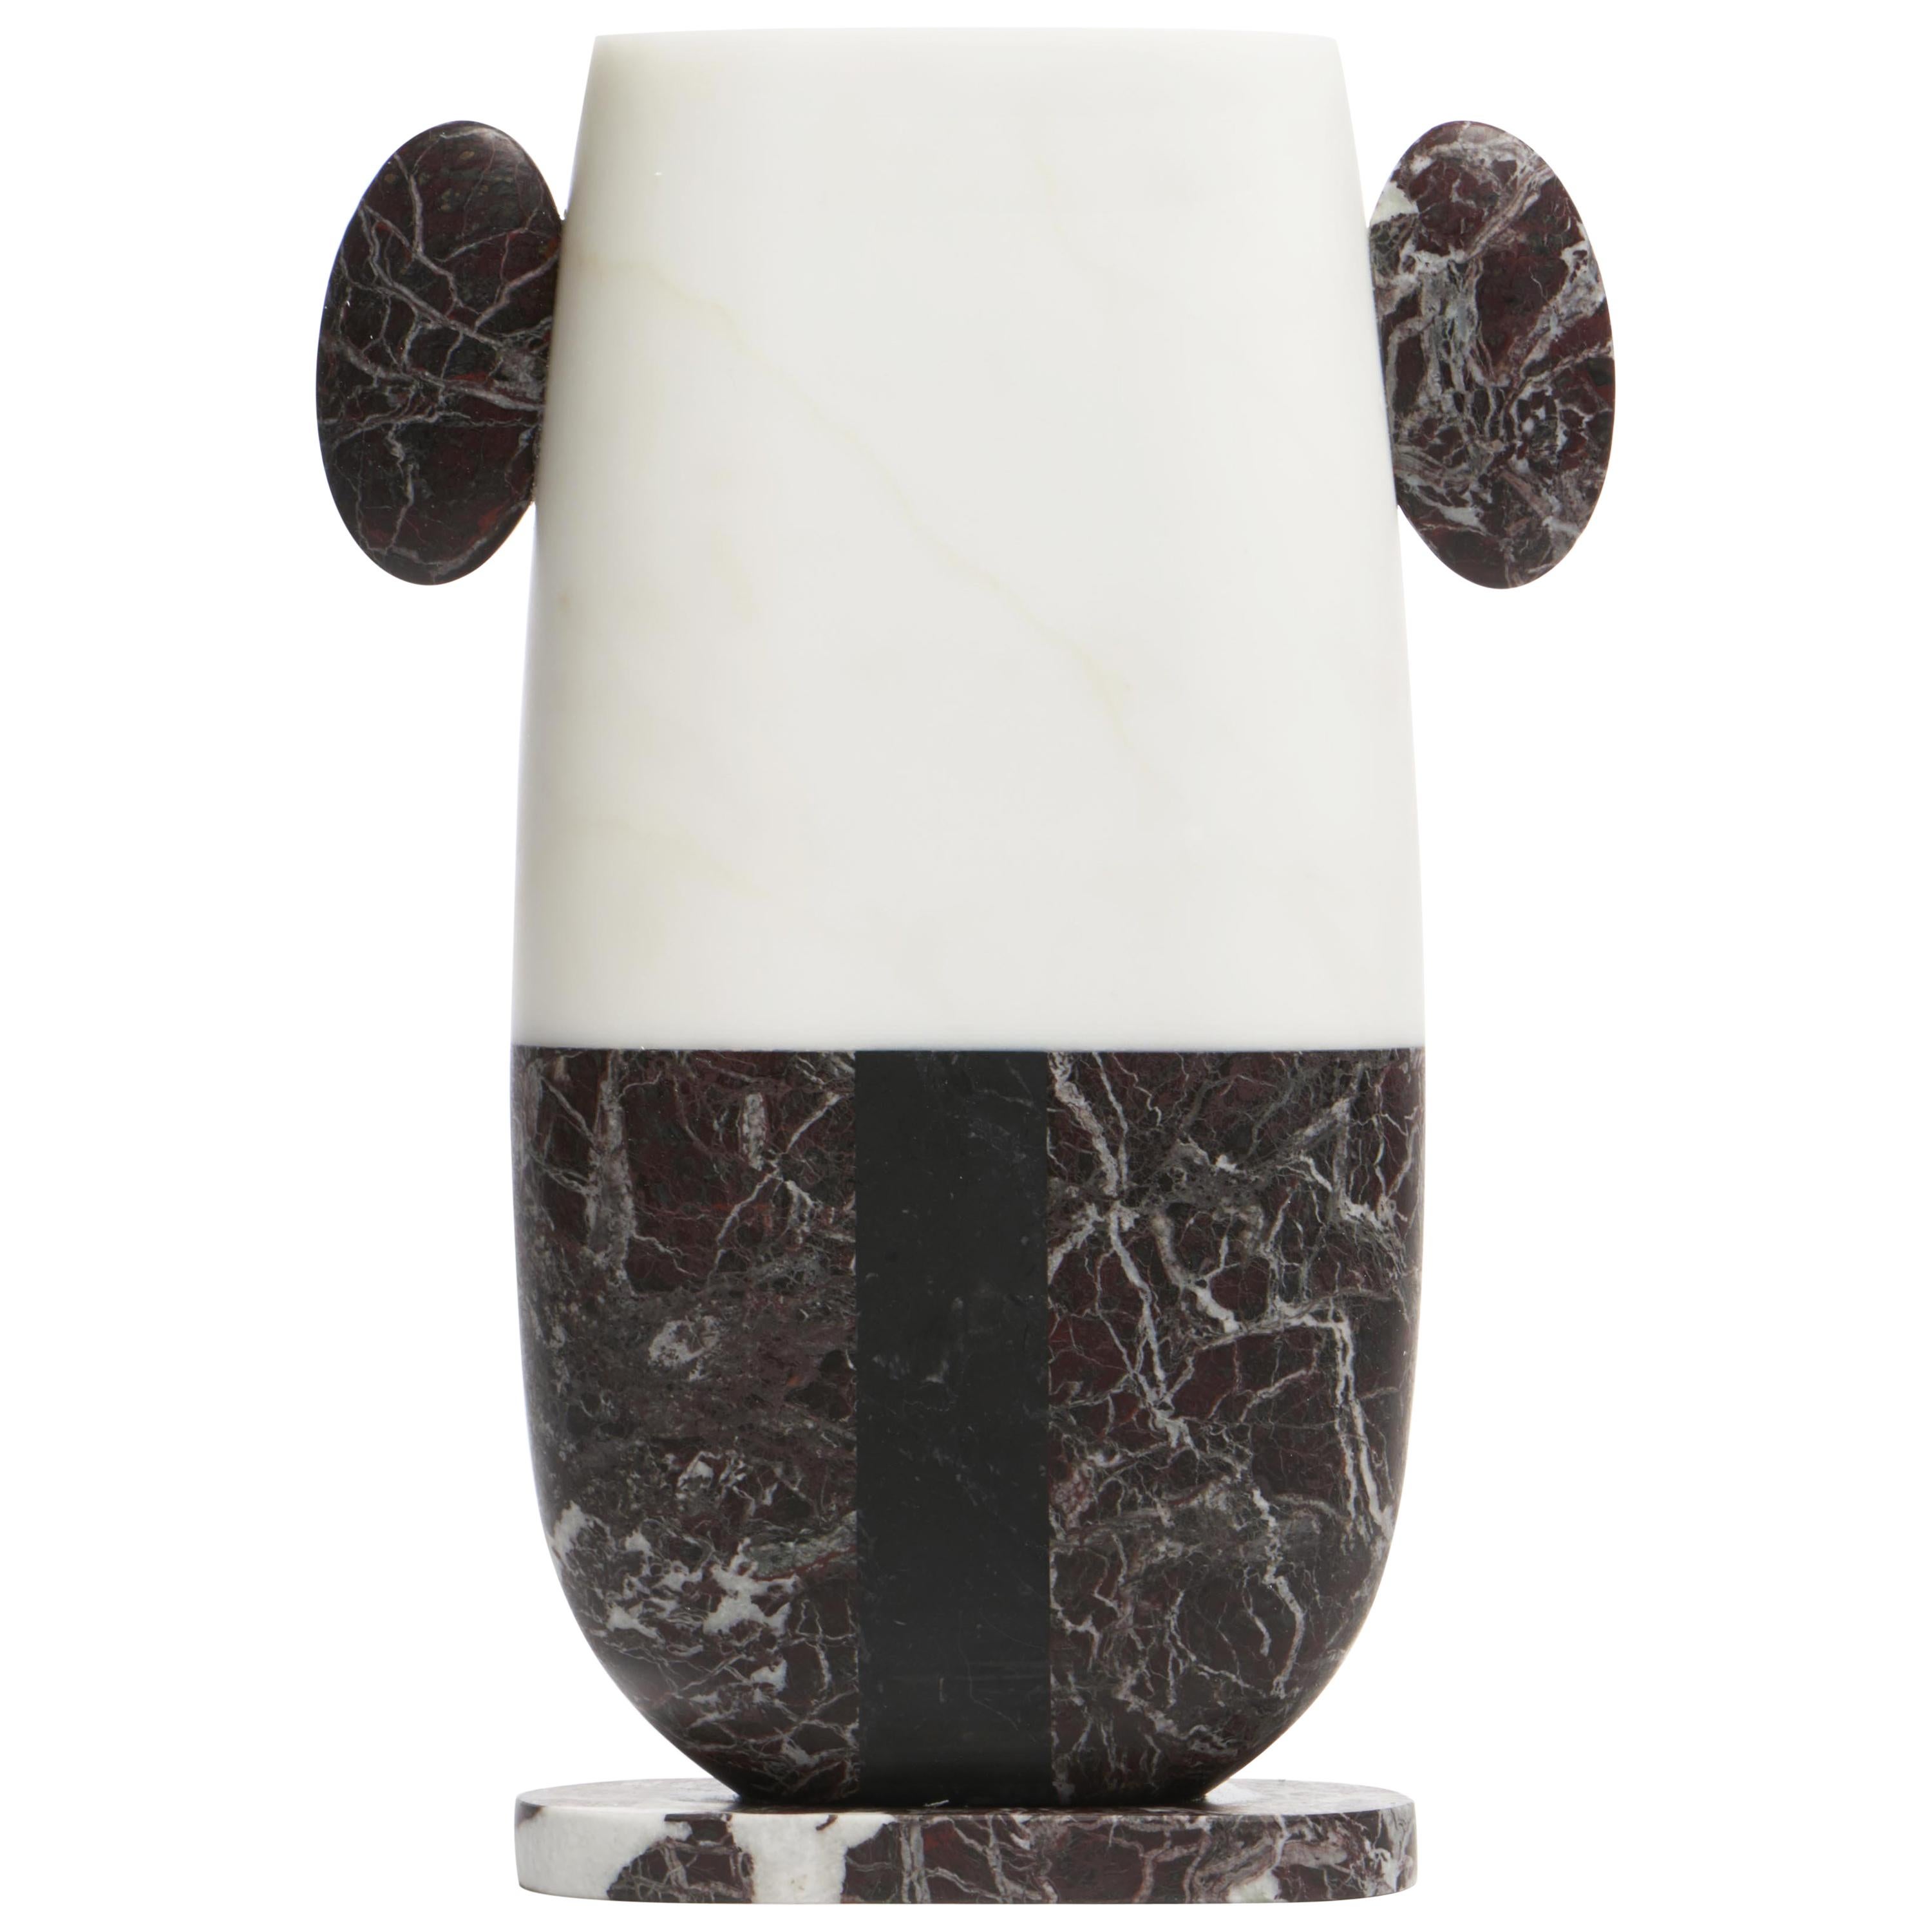 Vase in Bianco, Rosso and Black Marbles by Matteo Cibic, Made in Italy